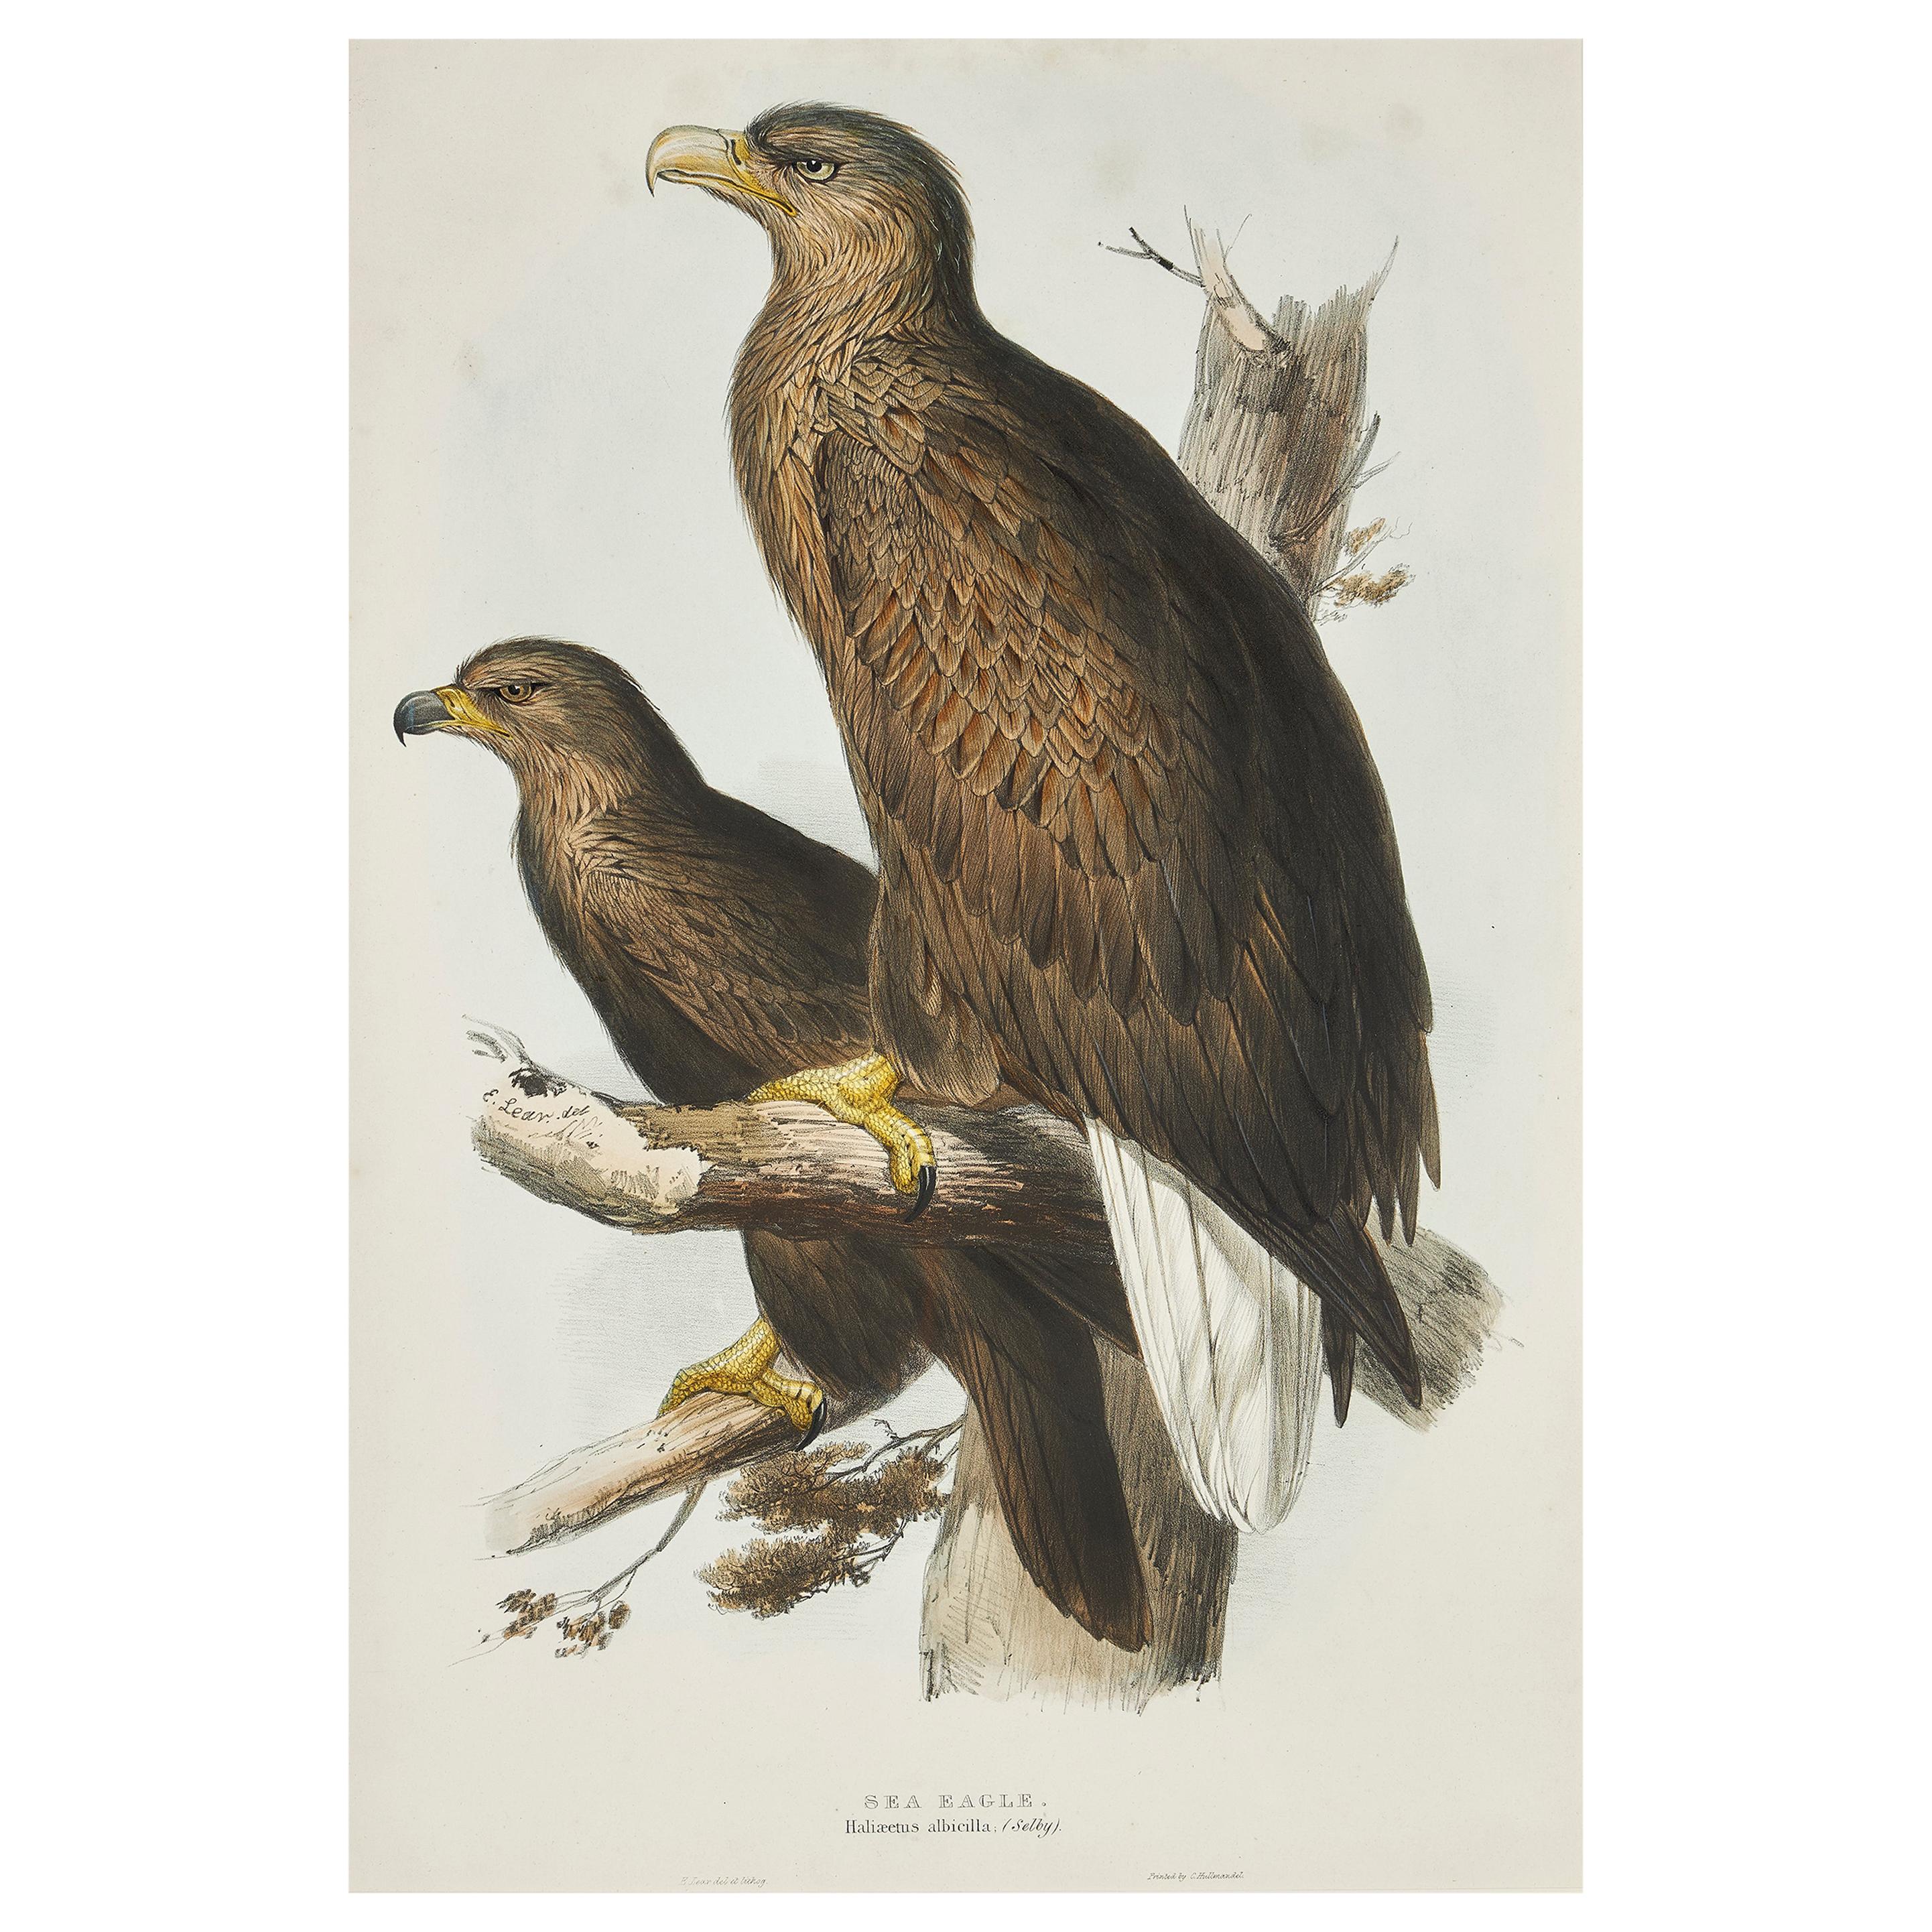 Edward Lear Lithograph from "The Birds of Europe"